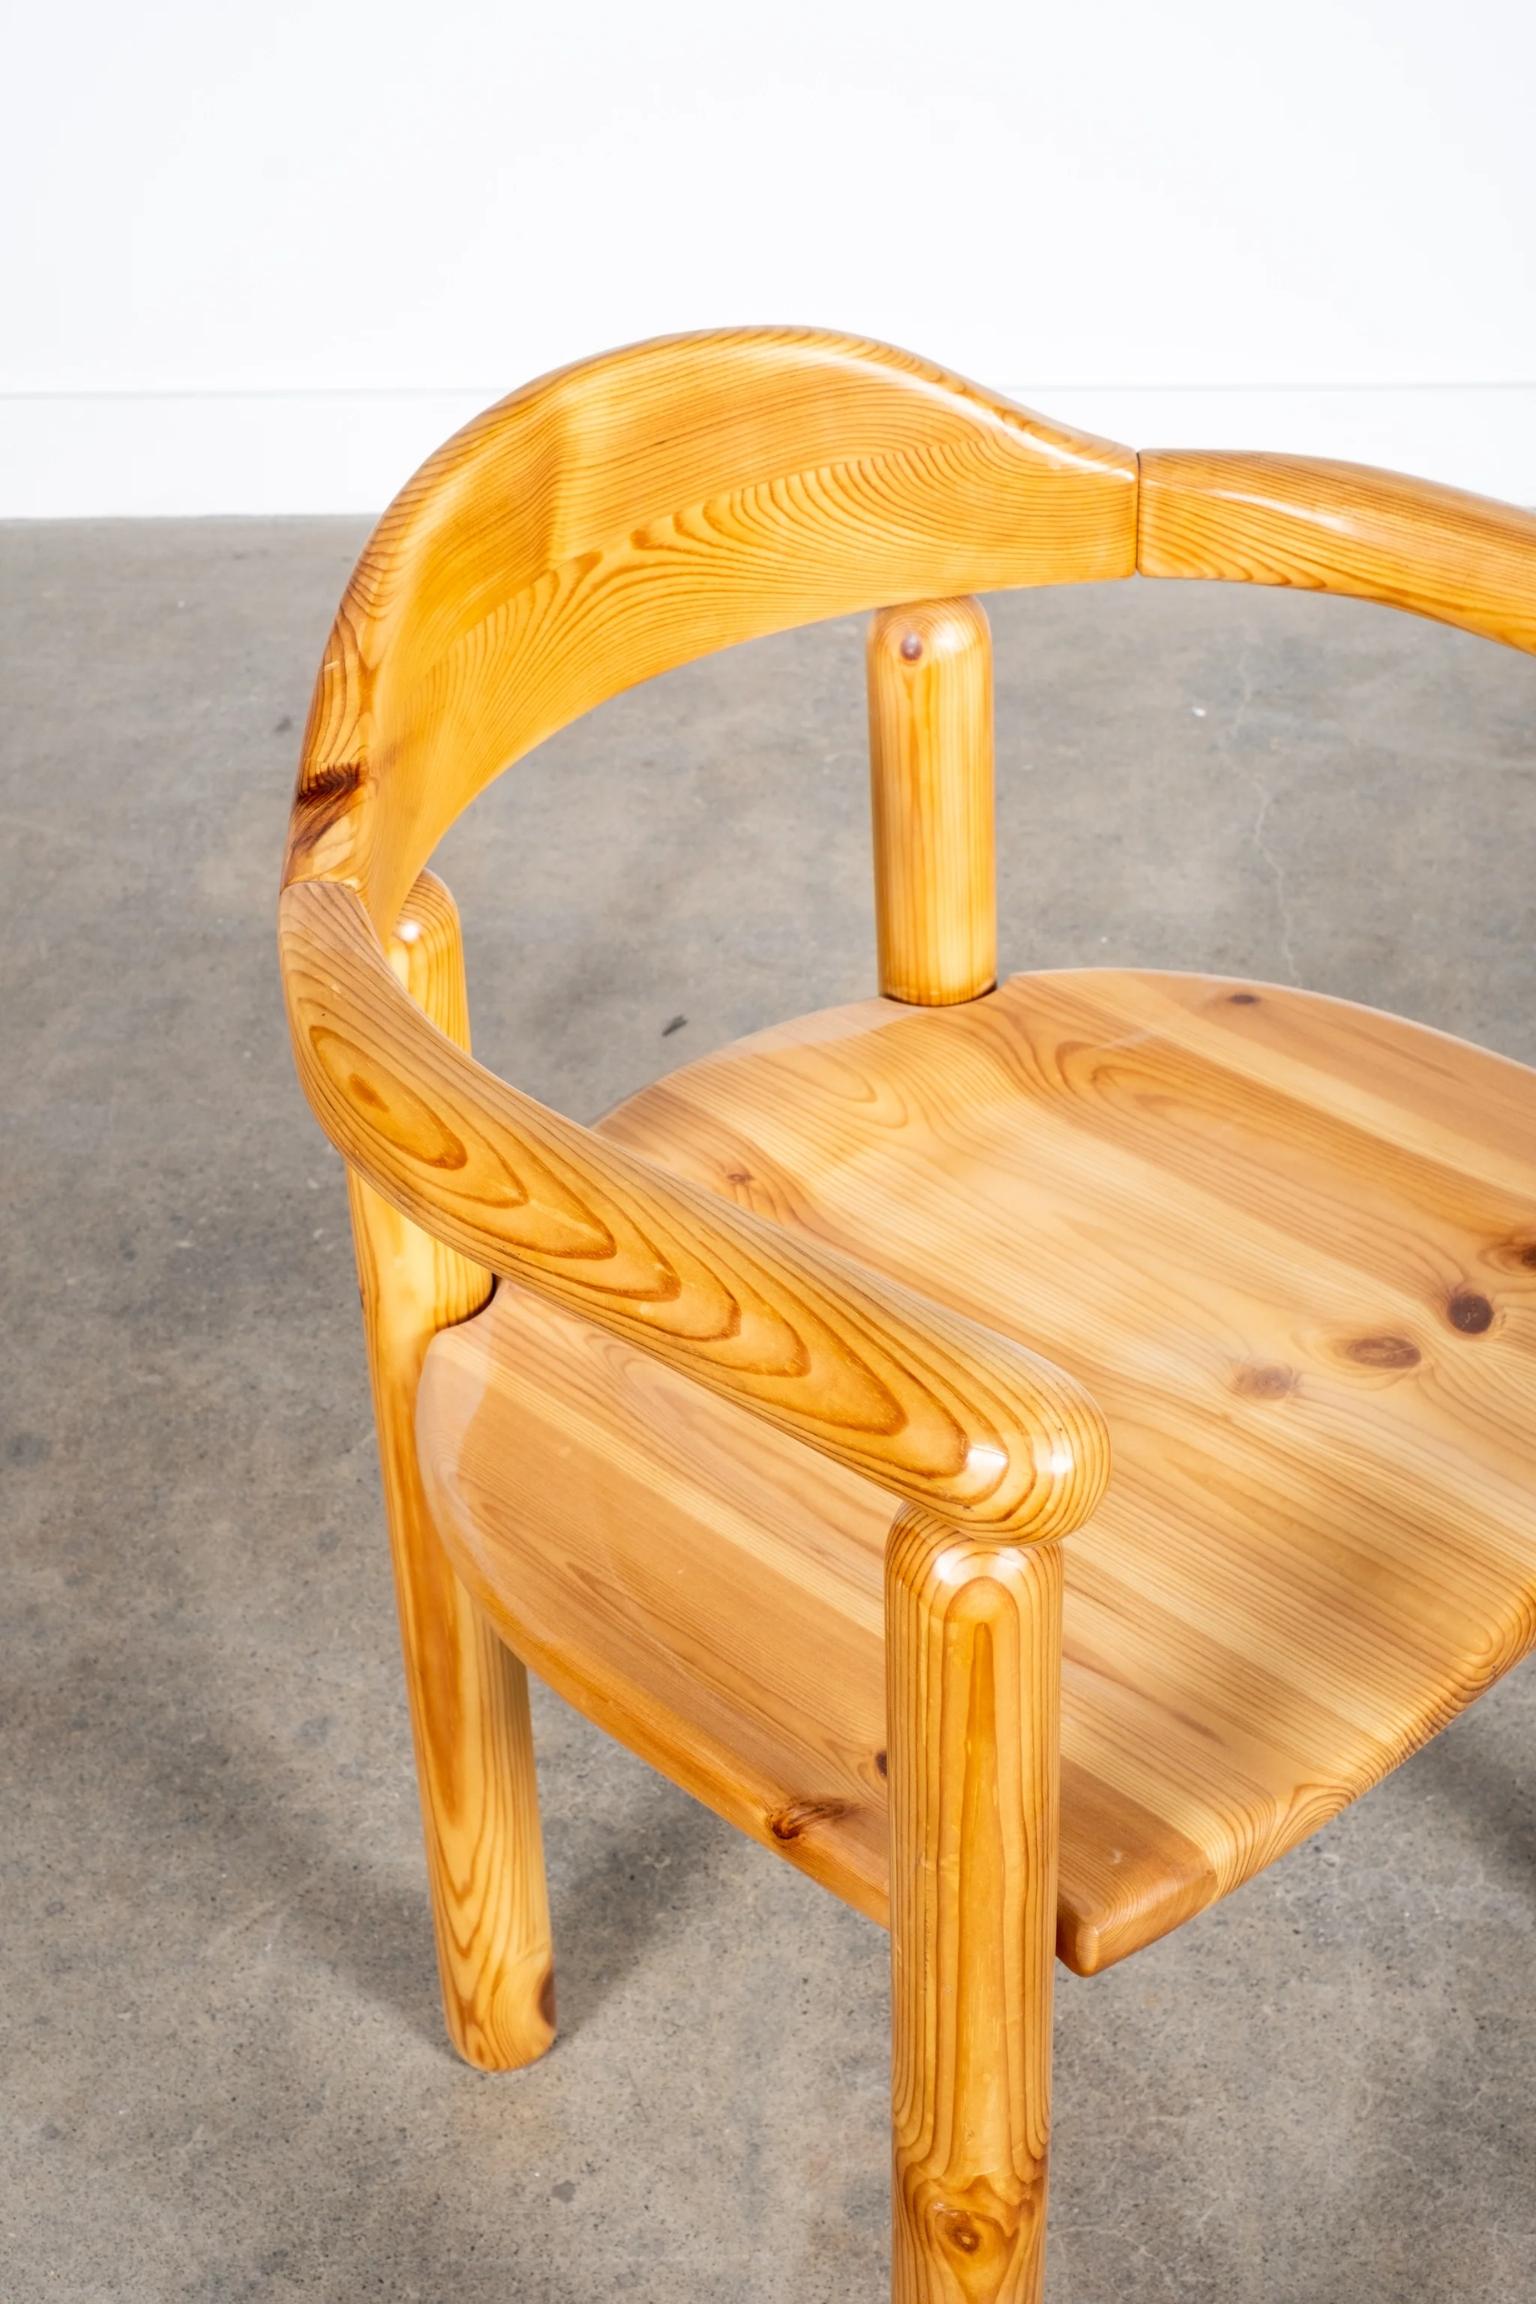 Solid in construction, simple in form, and sculptural in expression, the pine chair’s straightforward materiality and robust composition pay tribute to designer Daumiller’s lifelong affinity with nature. The designer’s choice of pine as his material